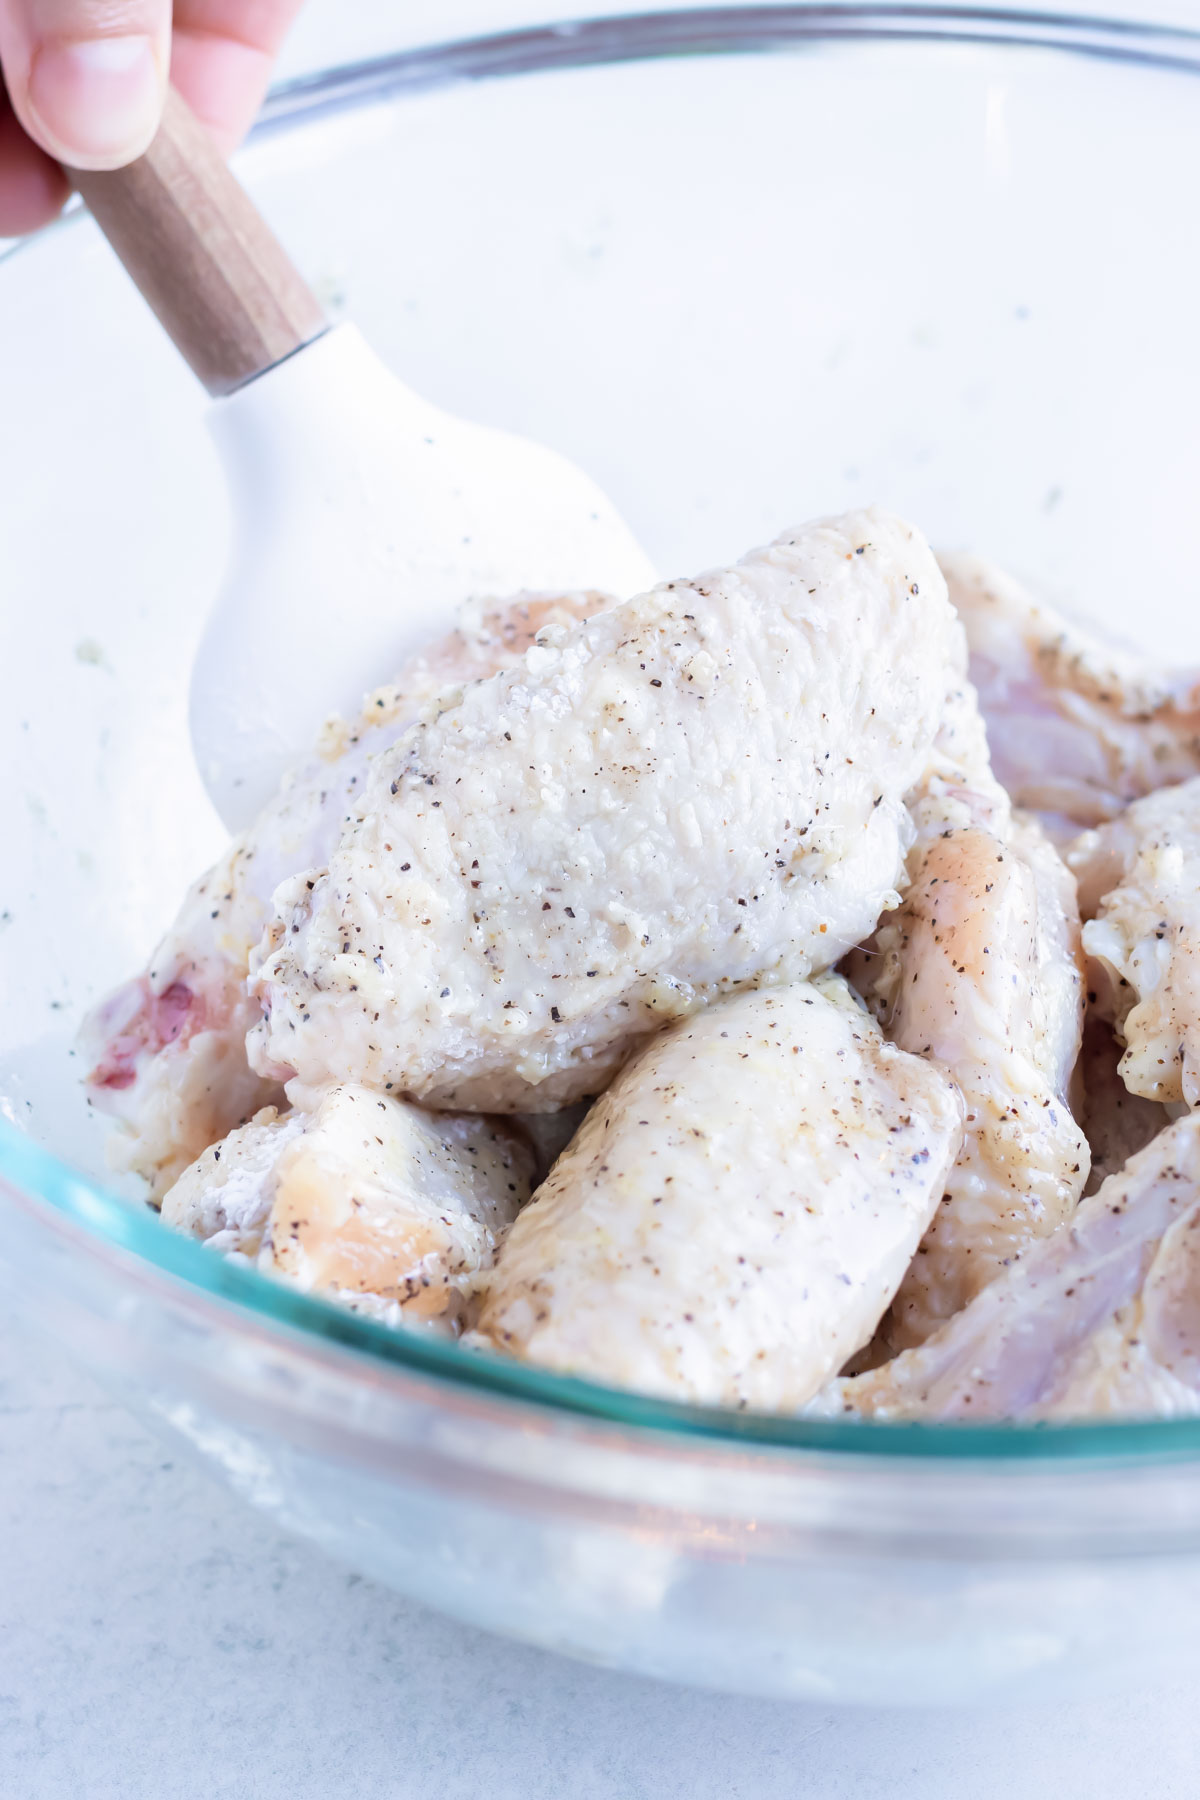 Raw chicken wings are coated with corn starch in a glass bowl.